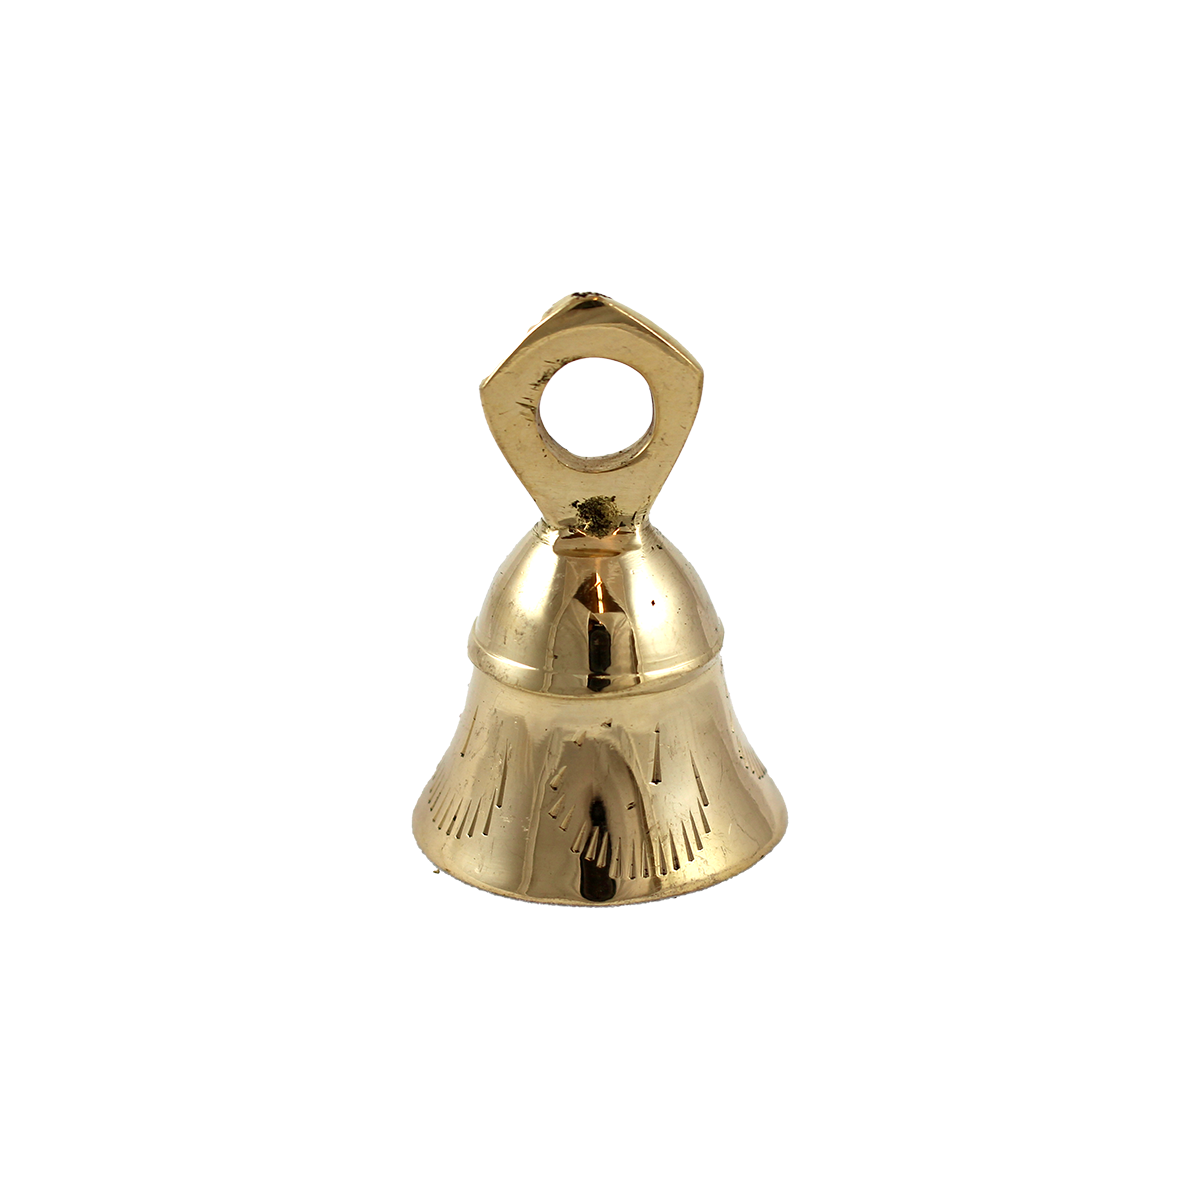 Hand bell with cap